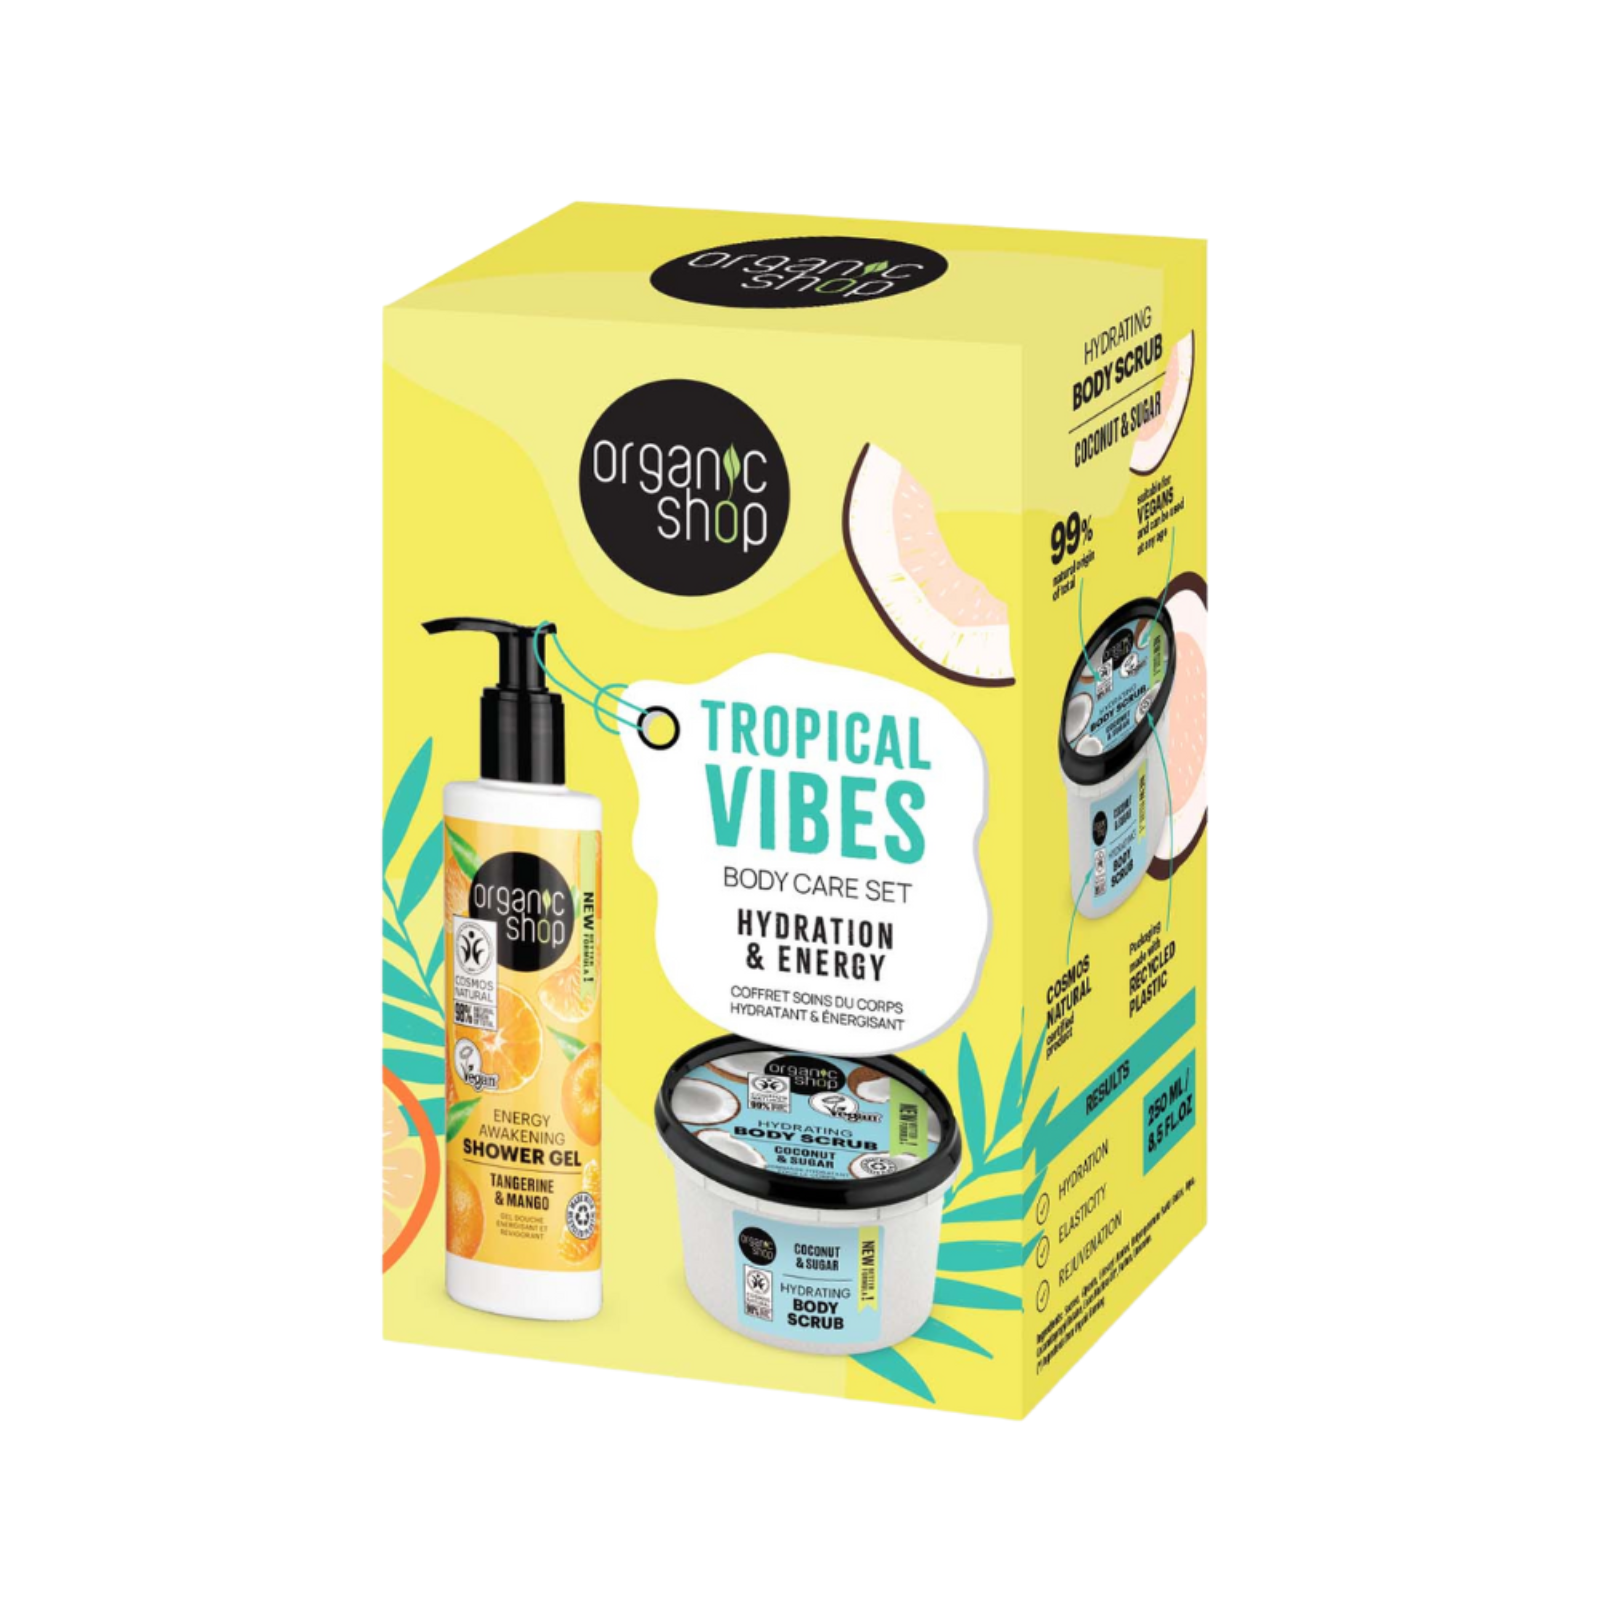 Organic Shop Tropical Vibes Hydration & Energy Body Care Gift Set